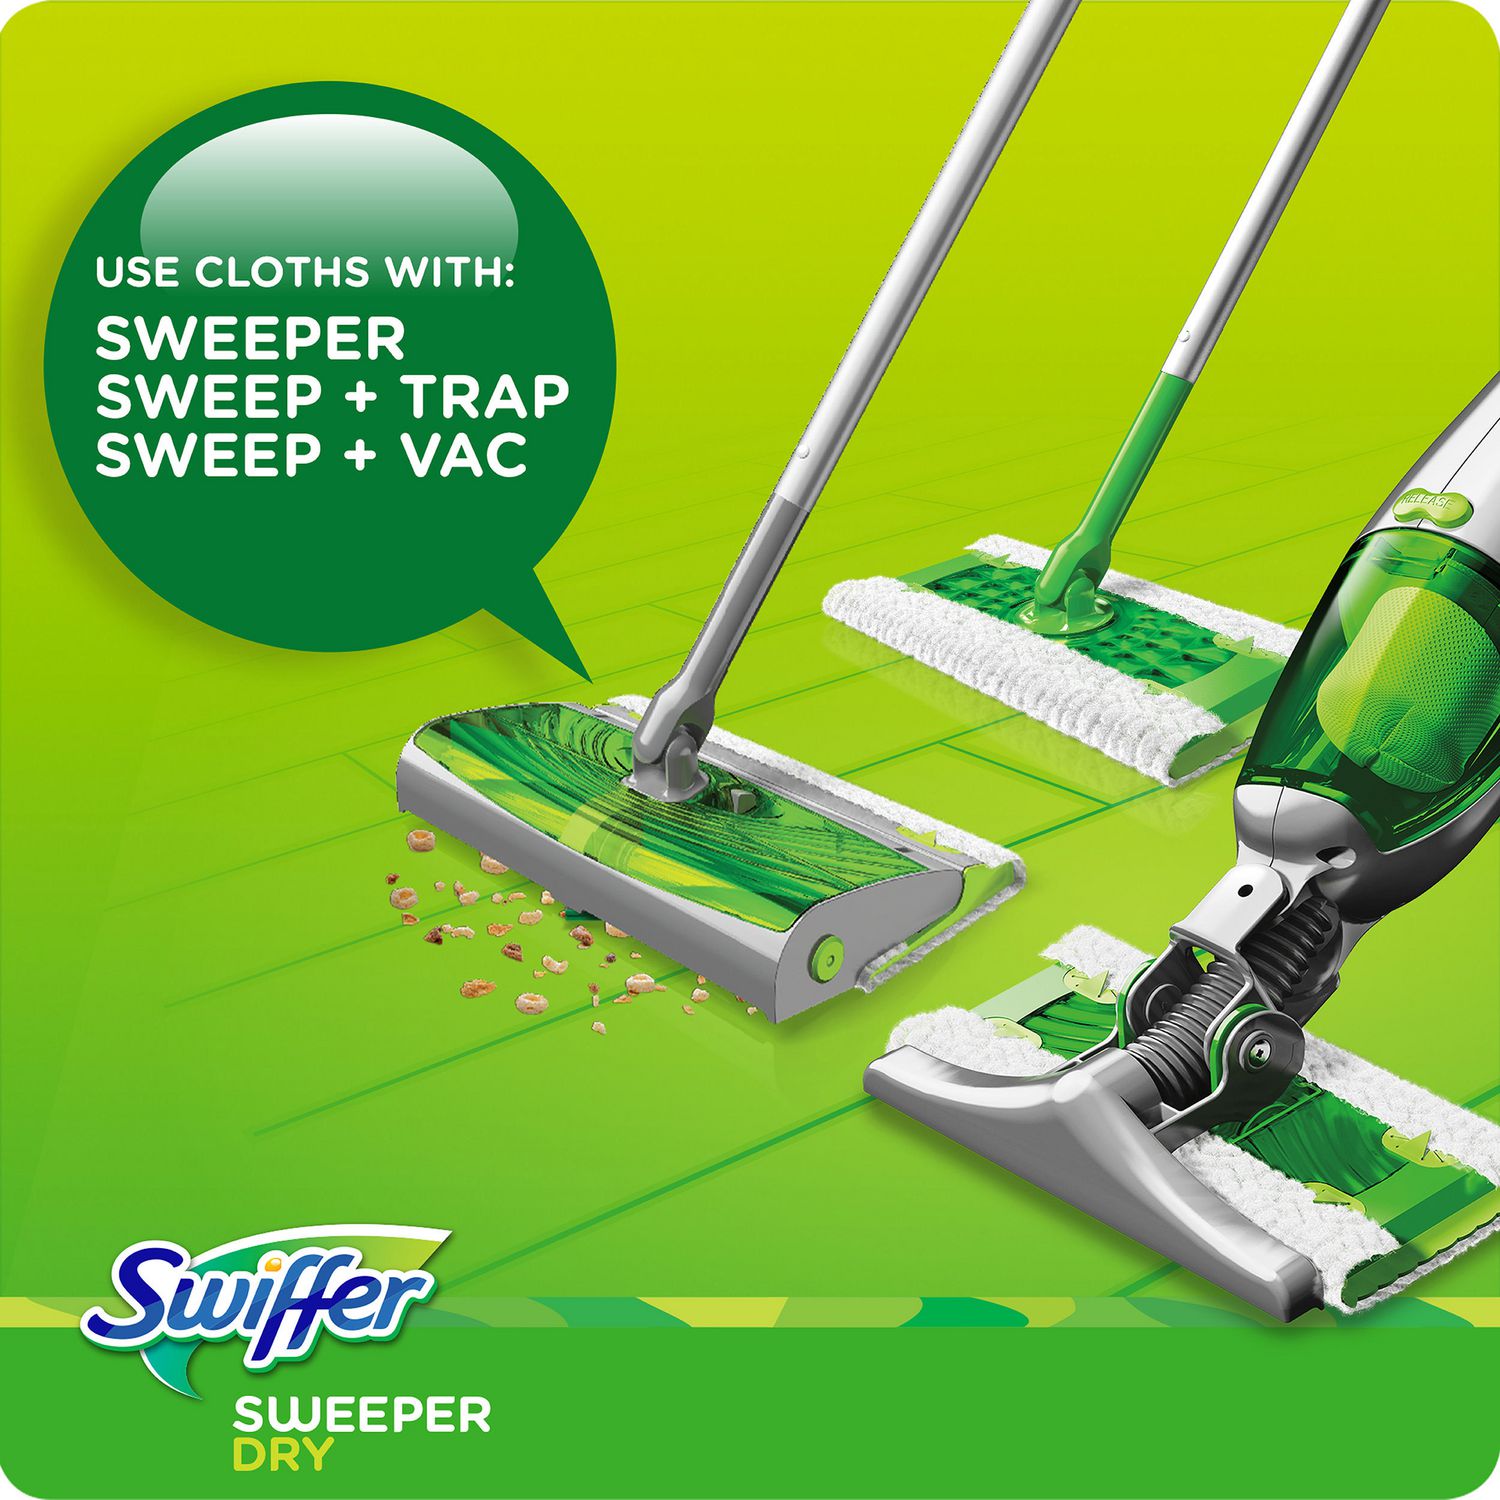 Recharge pour balai Swiffer Humide (12 uds)